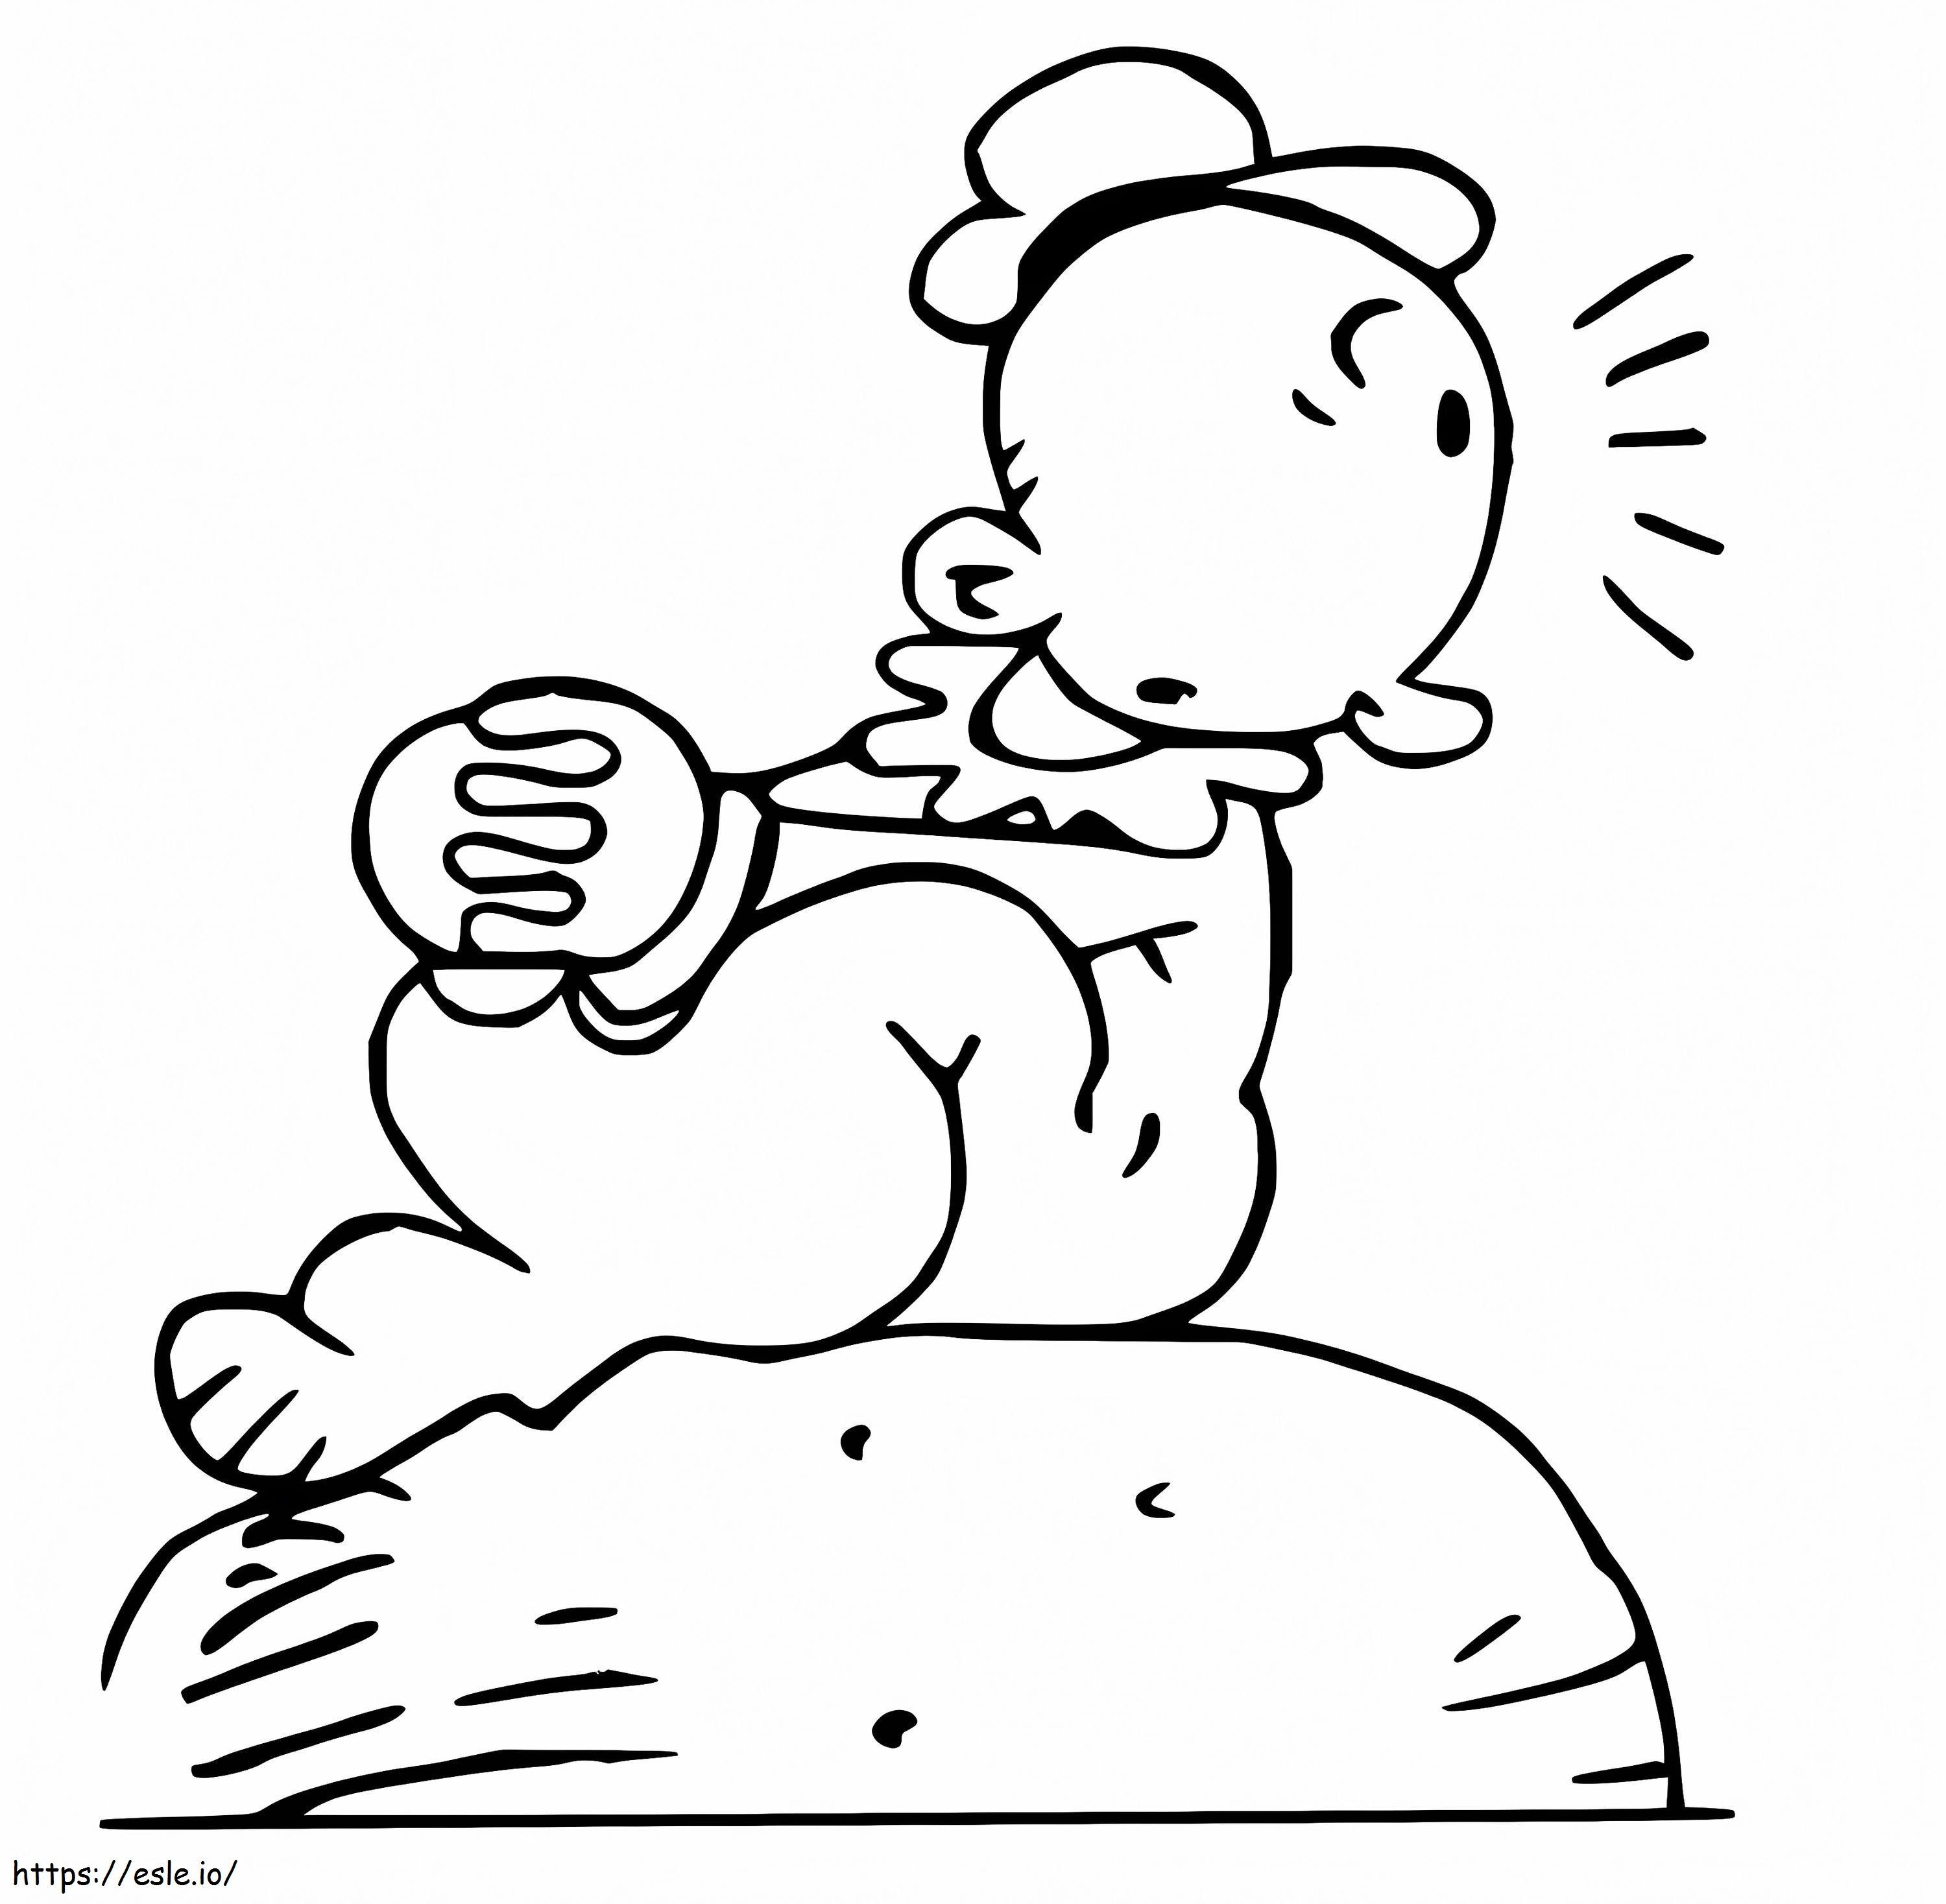 Sweepea From Popeye coloring page